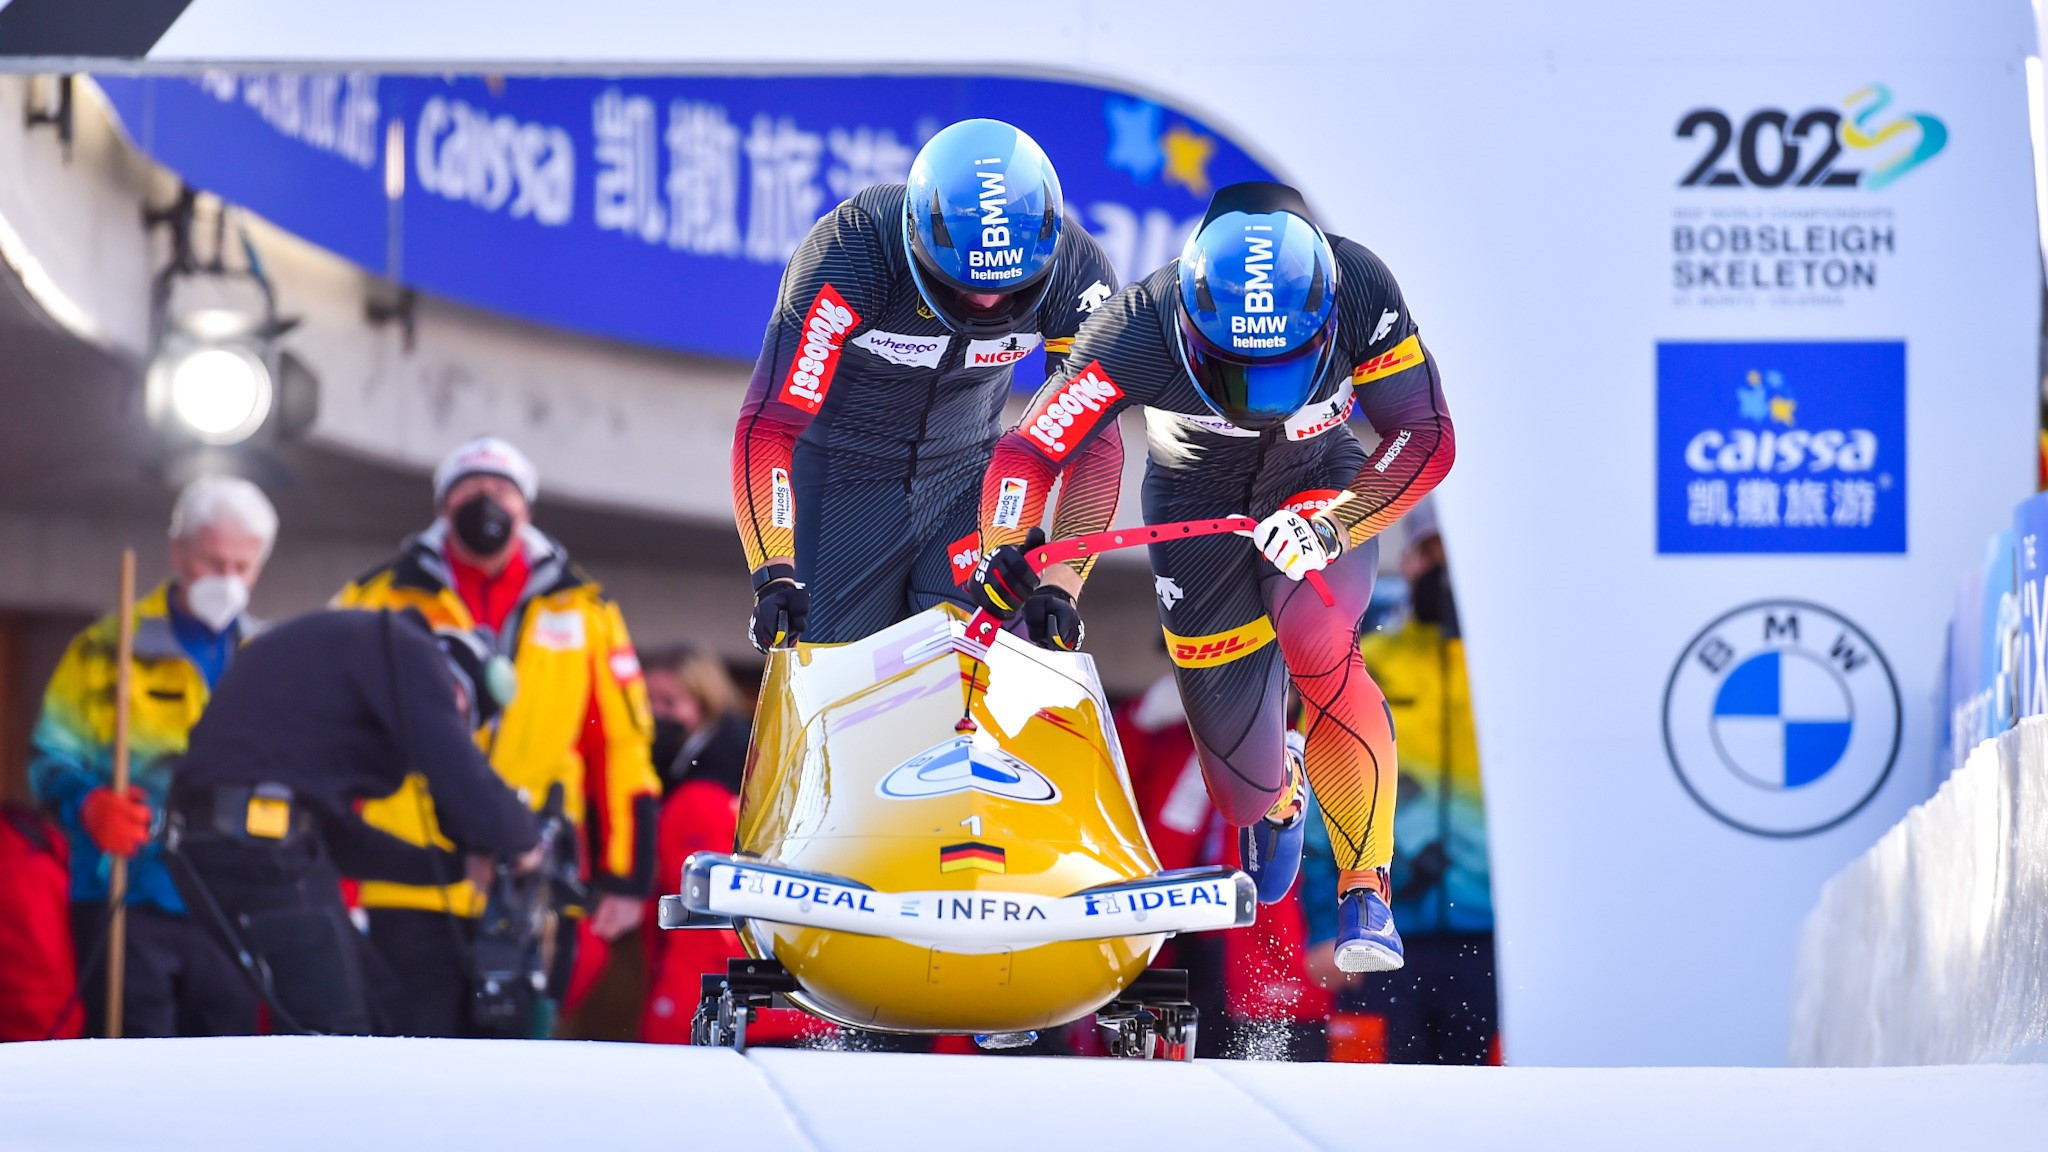 Friedrich and Meyers Taylor emerge victorious at IBSF World Cup